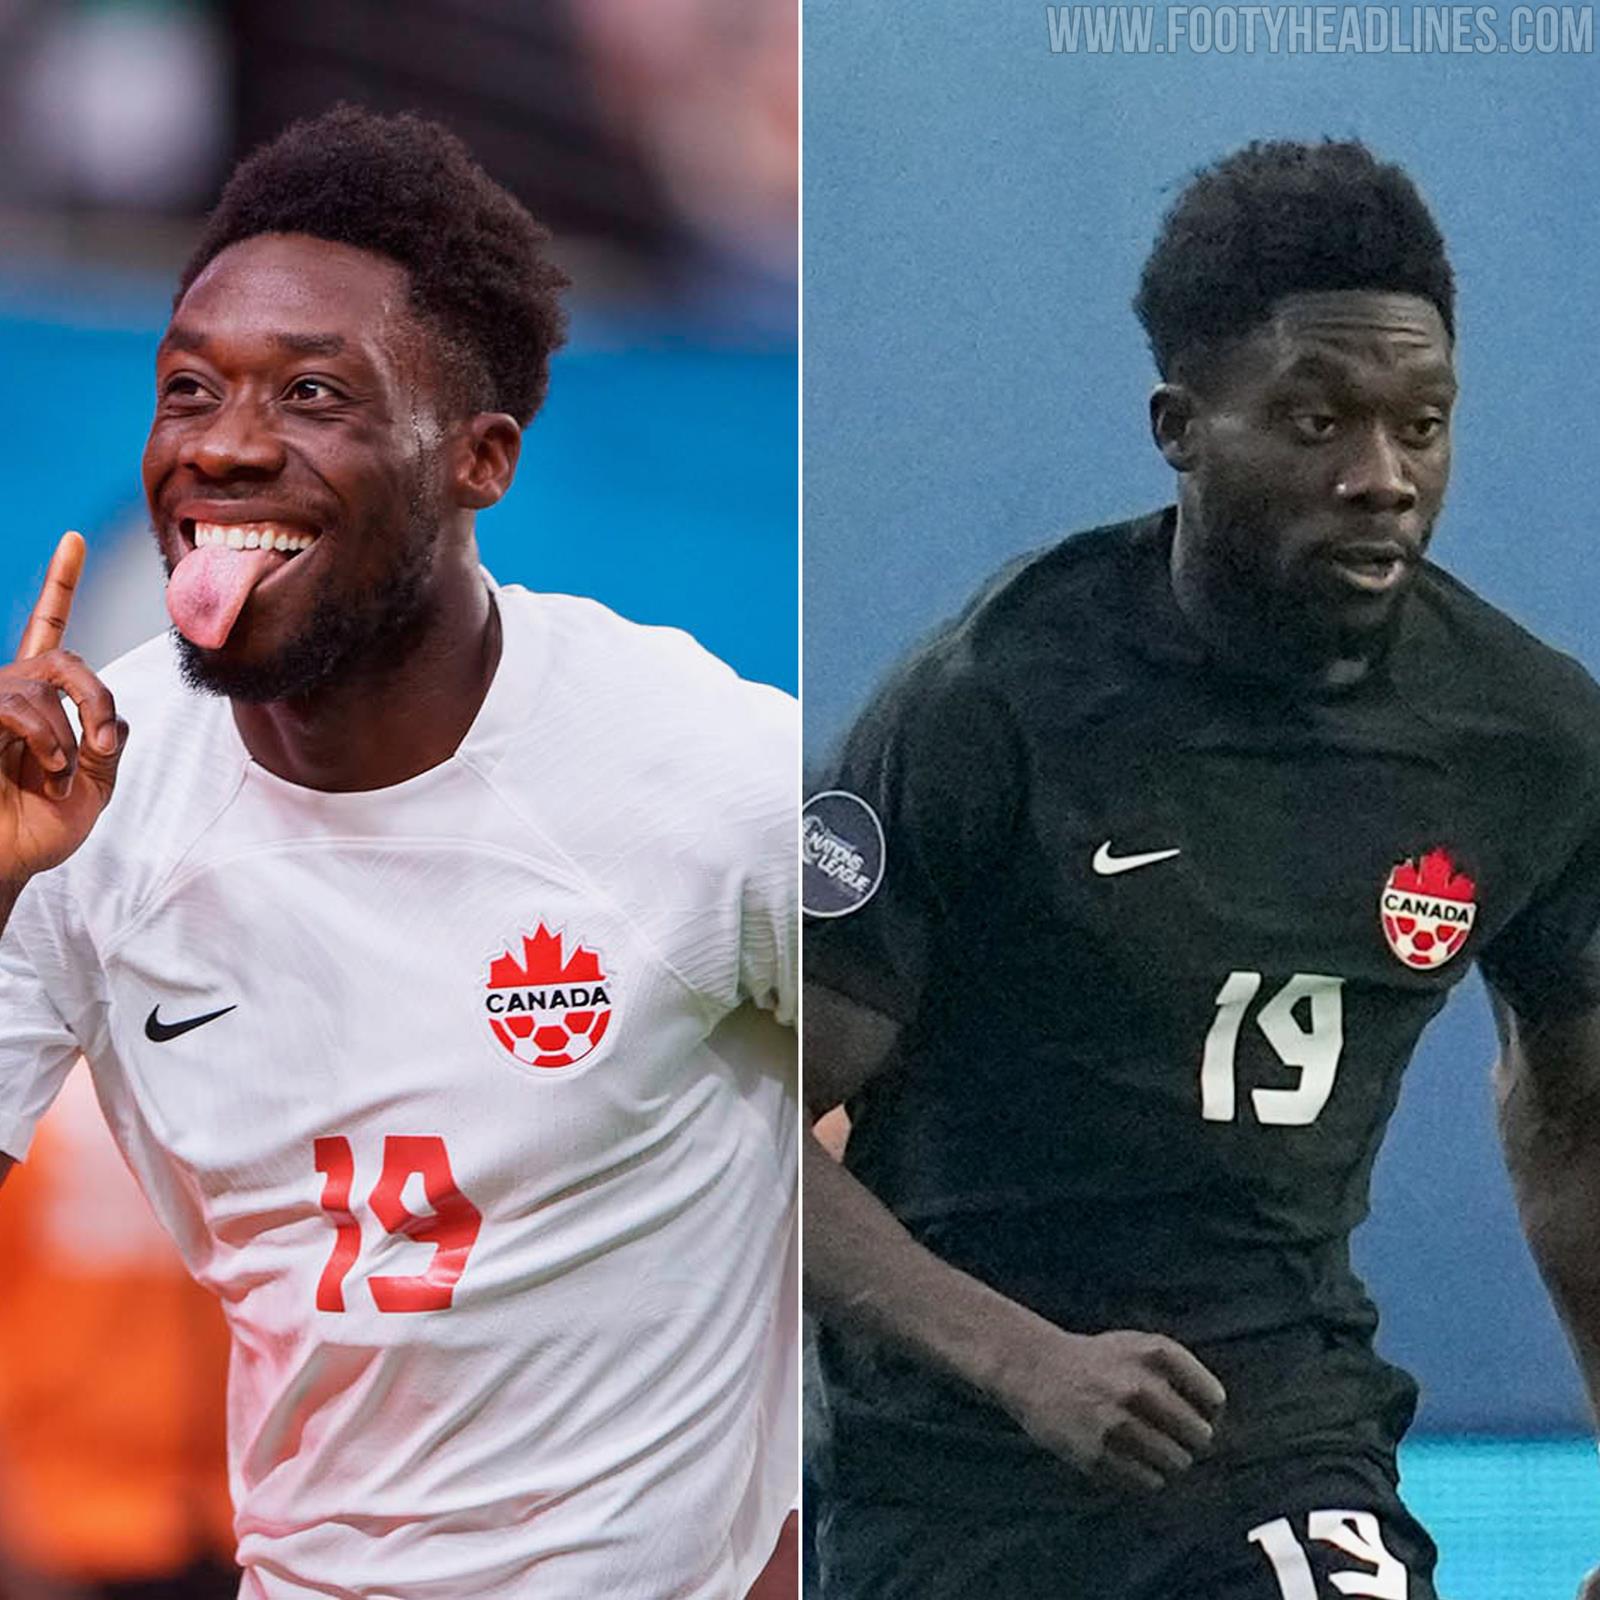 Canada Men 2021 Home, Away & Third Kits Released - Teamwear at 375% Markup  - And Not Even the One Worn by the Team - Footy Headlines